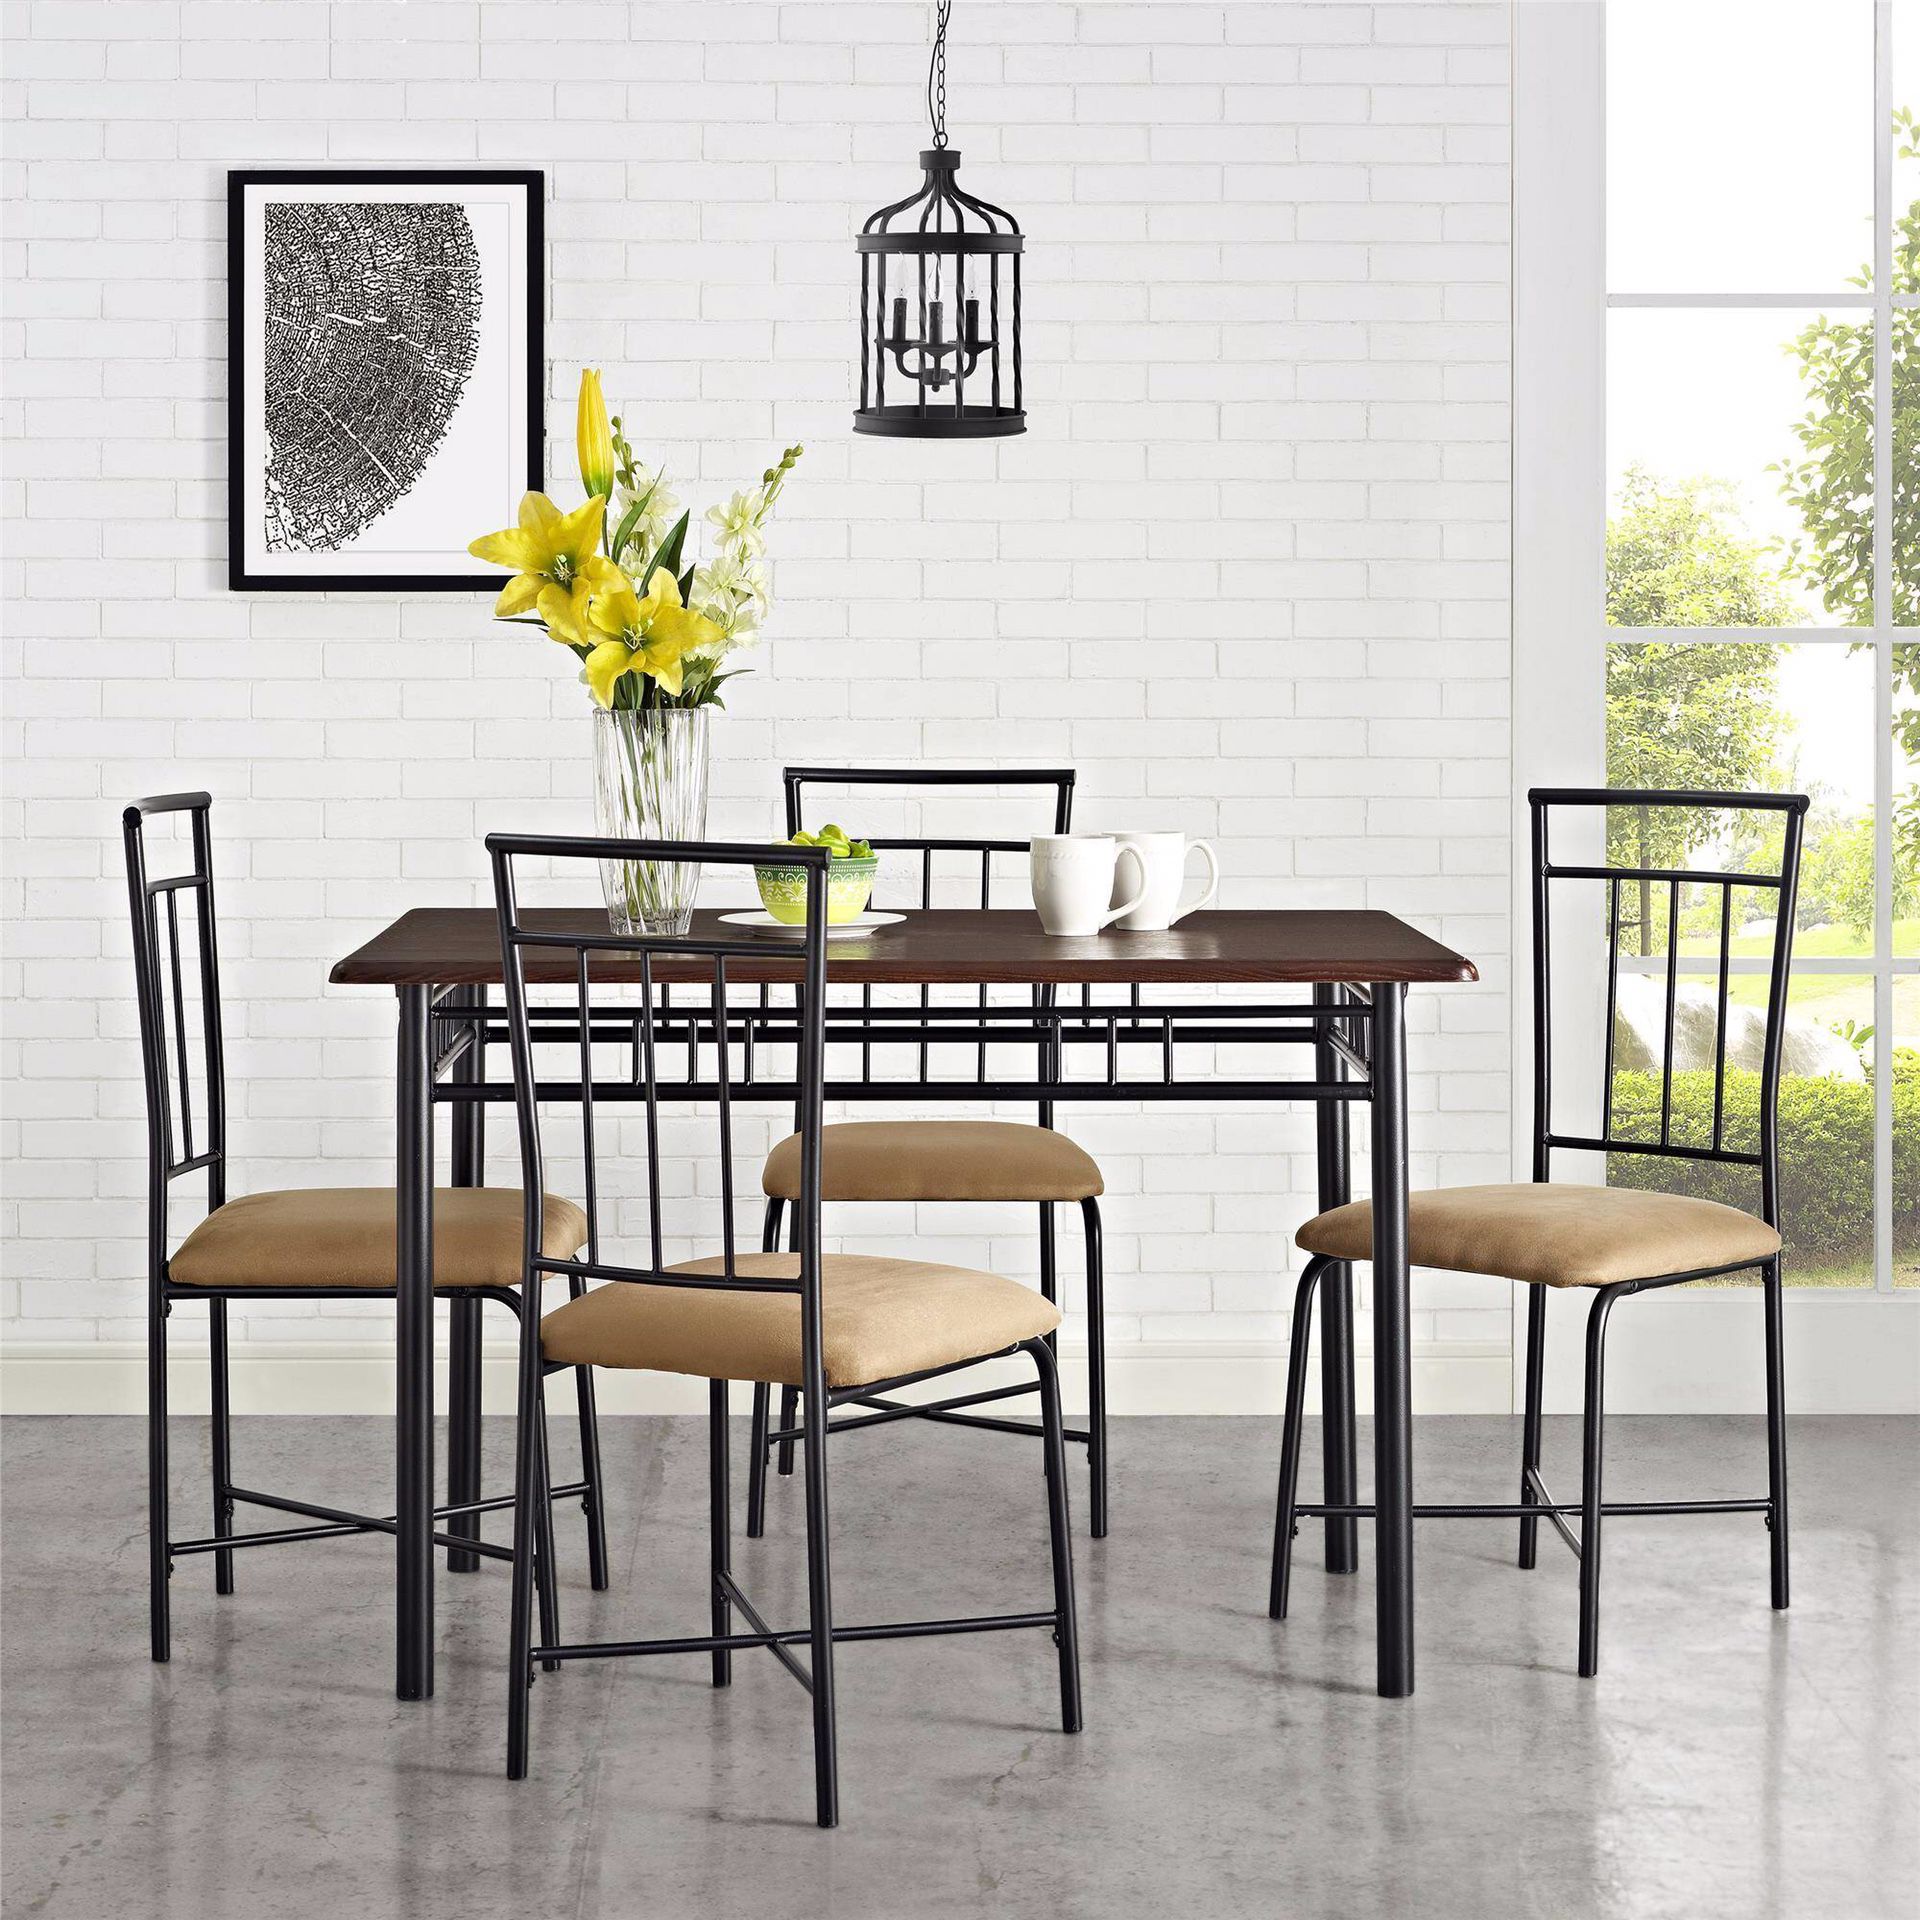 5-piece Dining Set, wooden table top, upholstered chairs